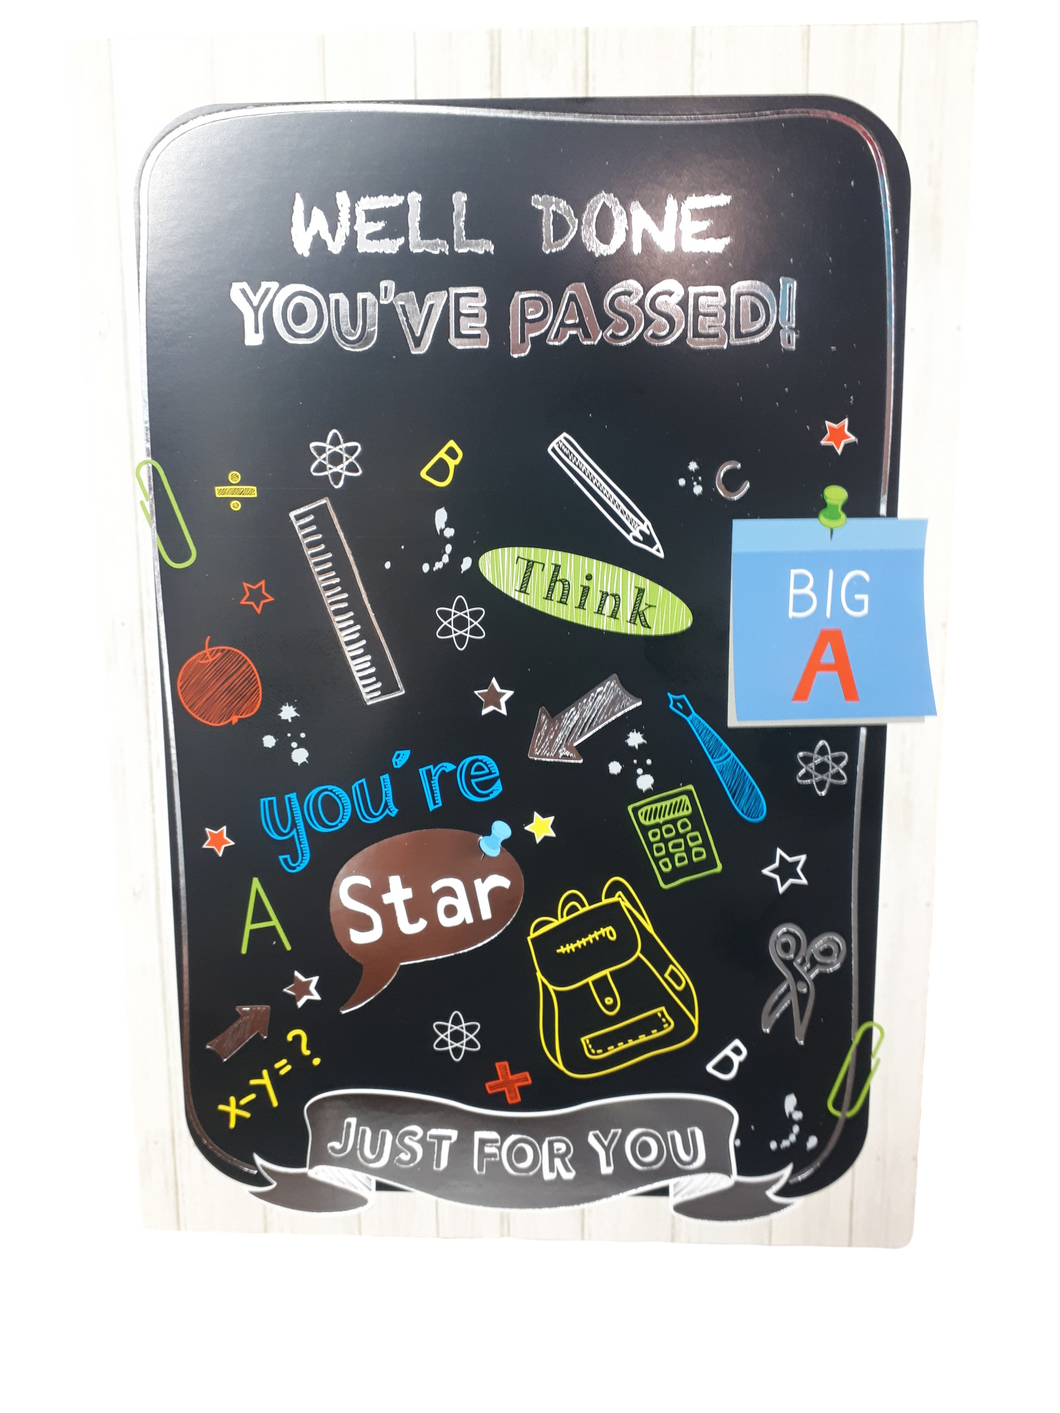 Congratulations - You Passed - Exams - Greeting Card - Free Postage